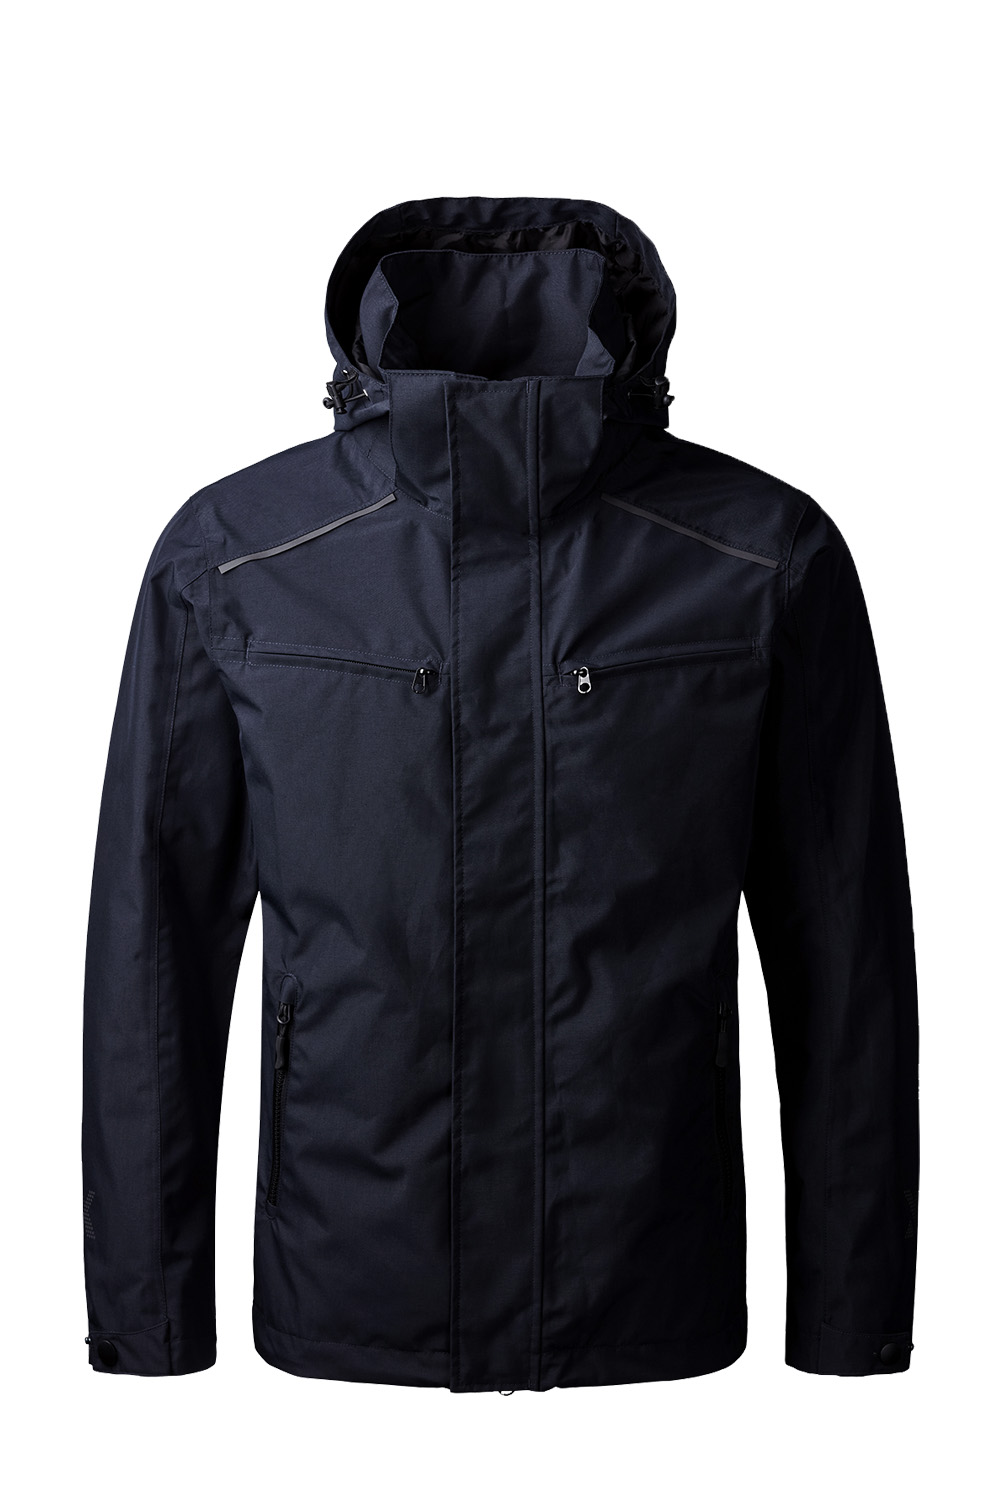 Picture of Urban summer jacket for men